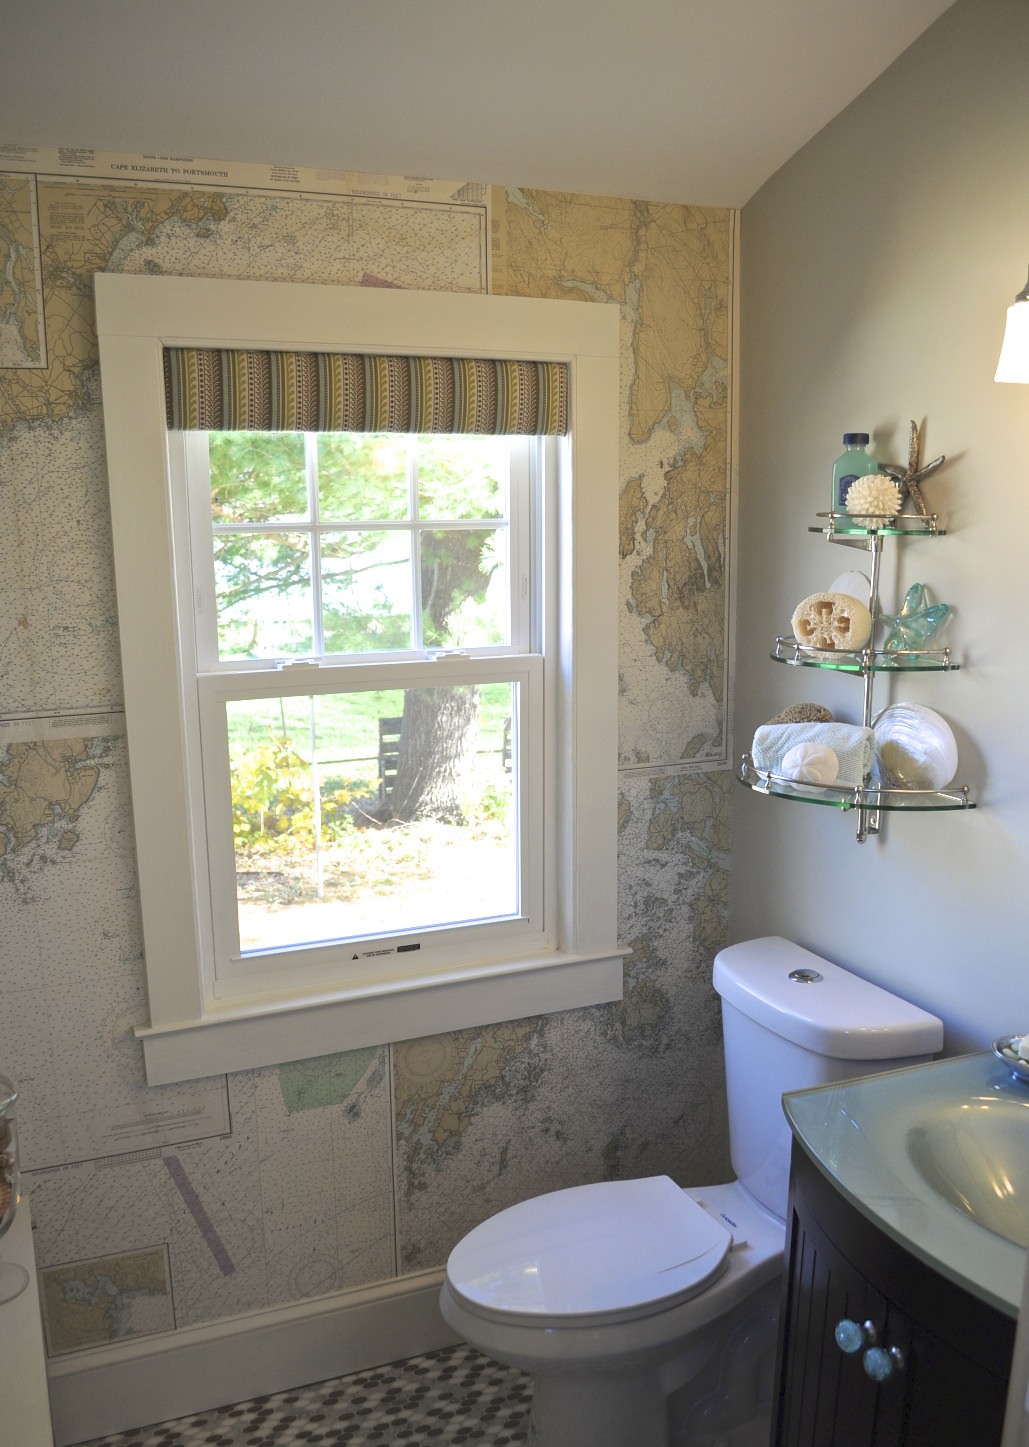 SoPo Cottage: Creative Wallpaper - How to Hang Nautical Charts